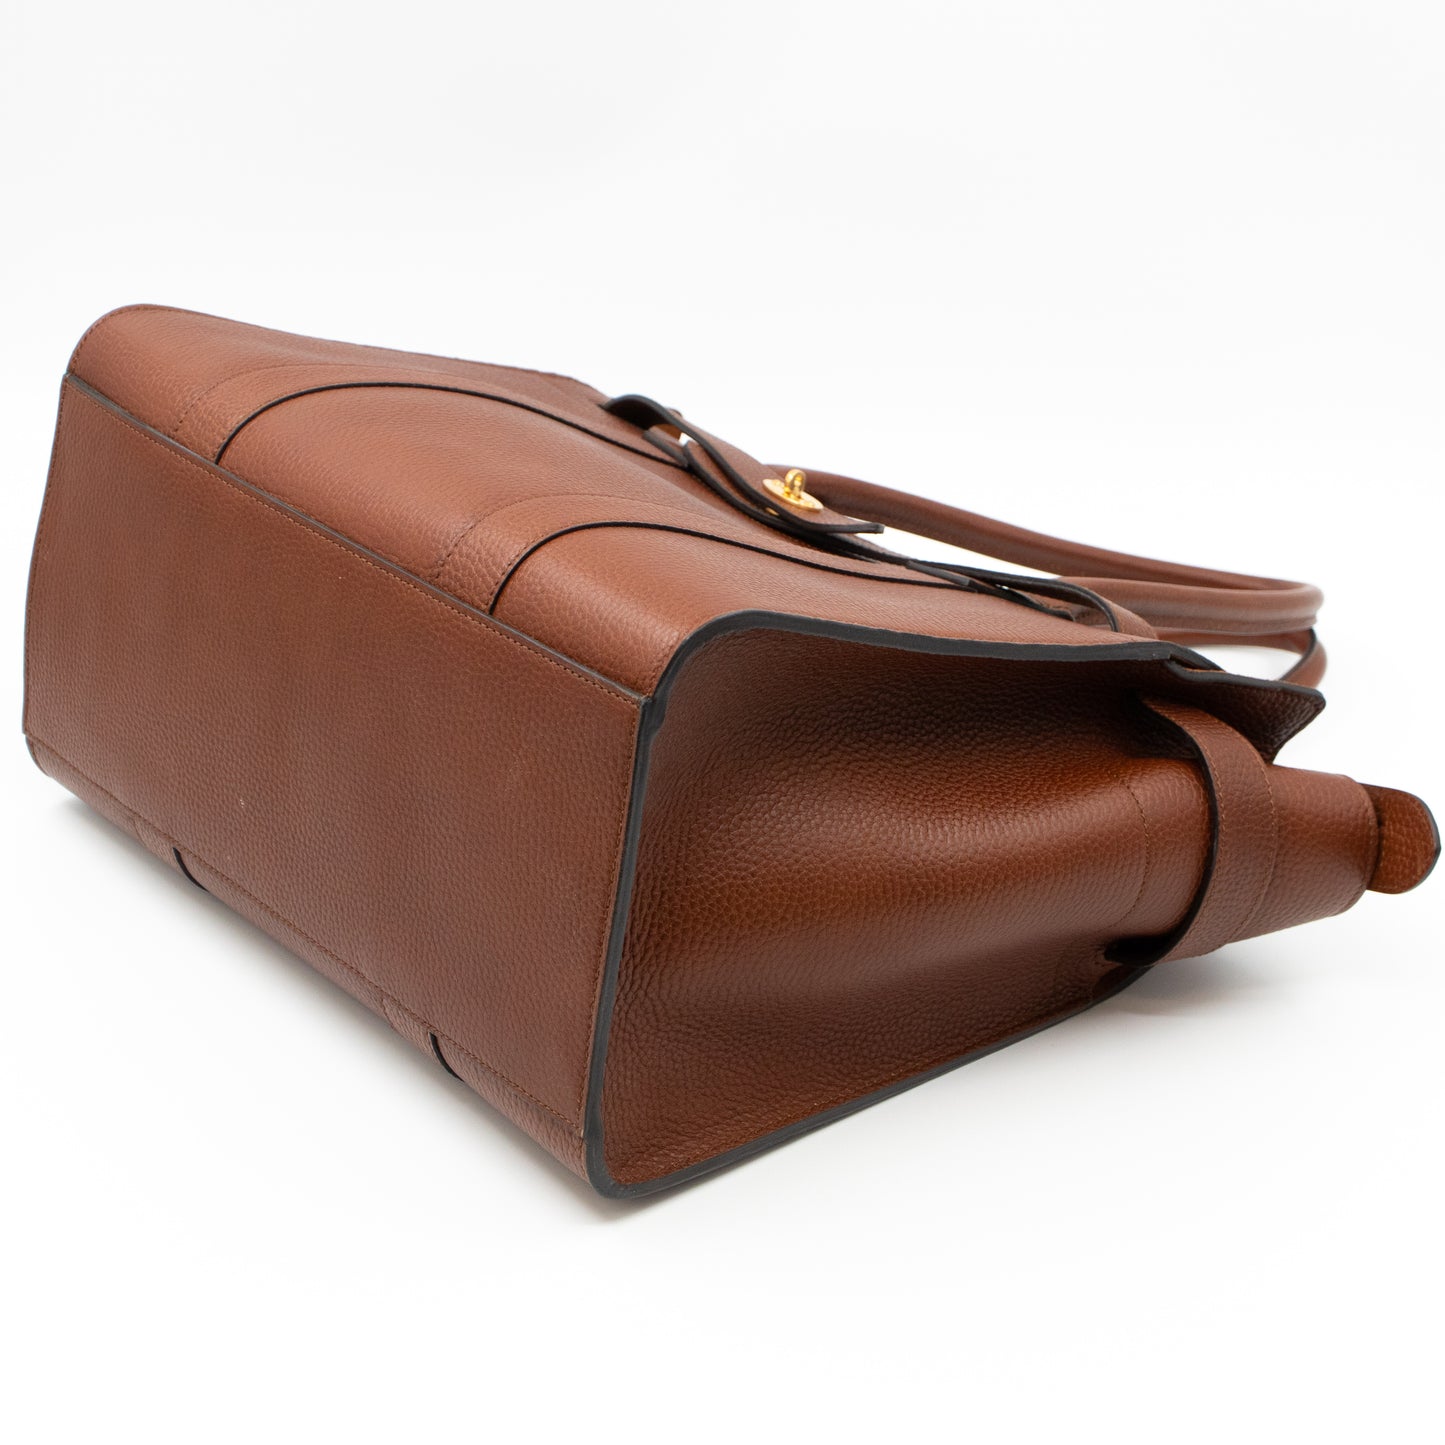 Large Zipped Bayswater Oak Brown Leather